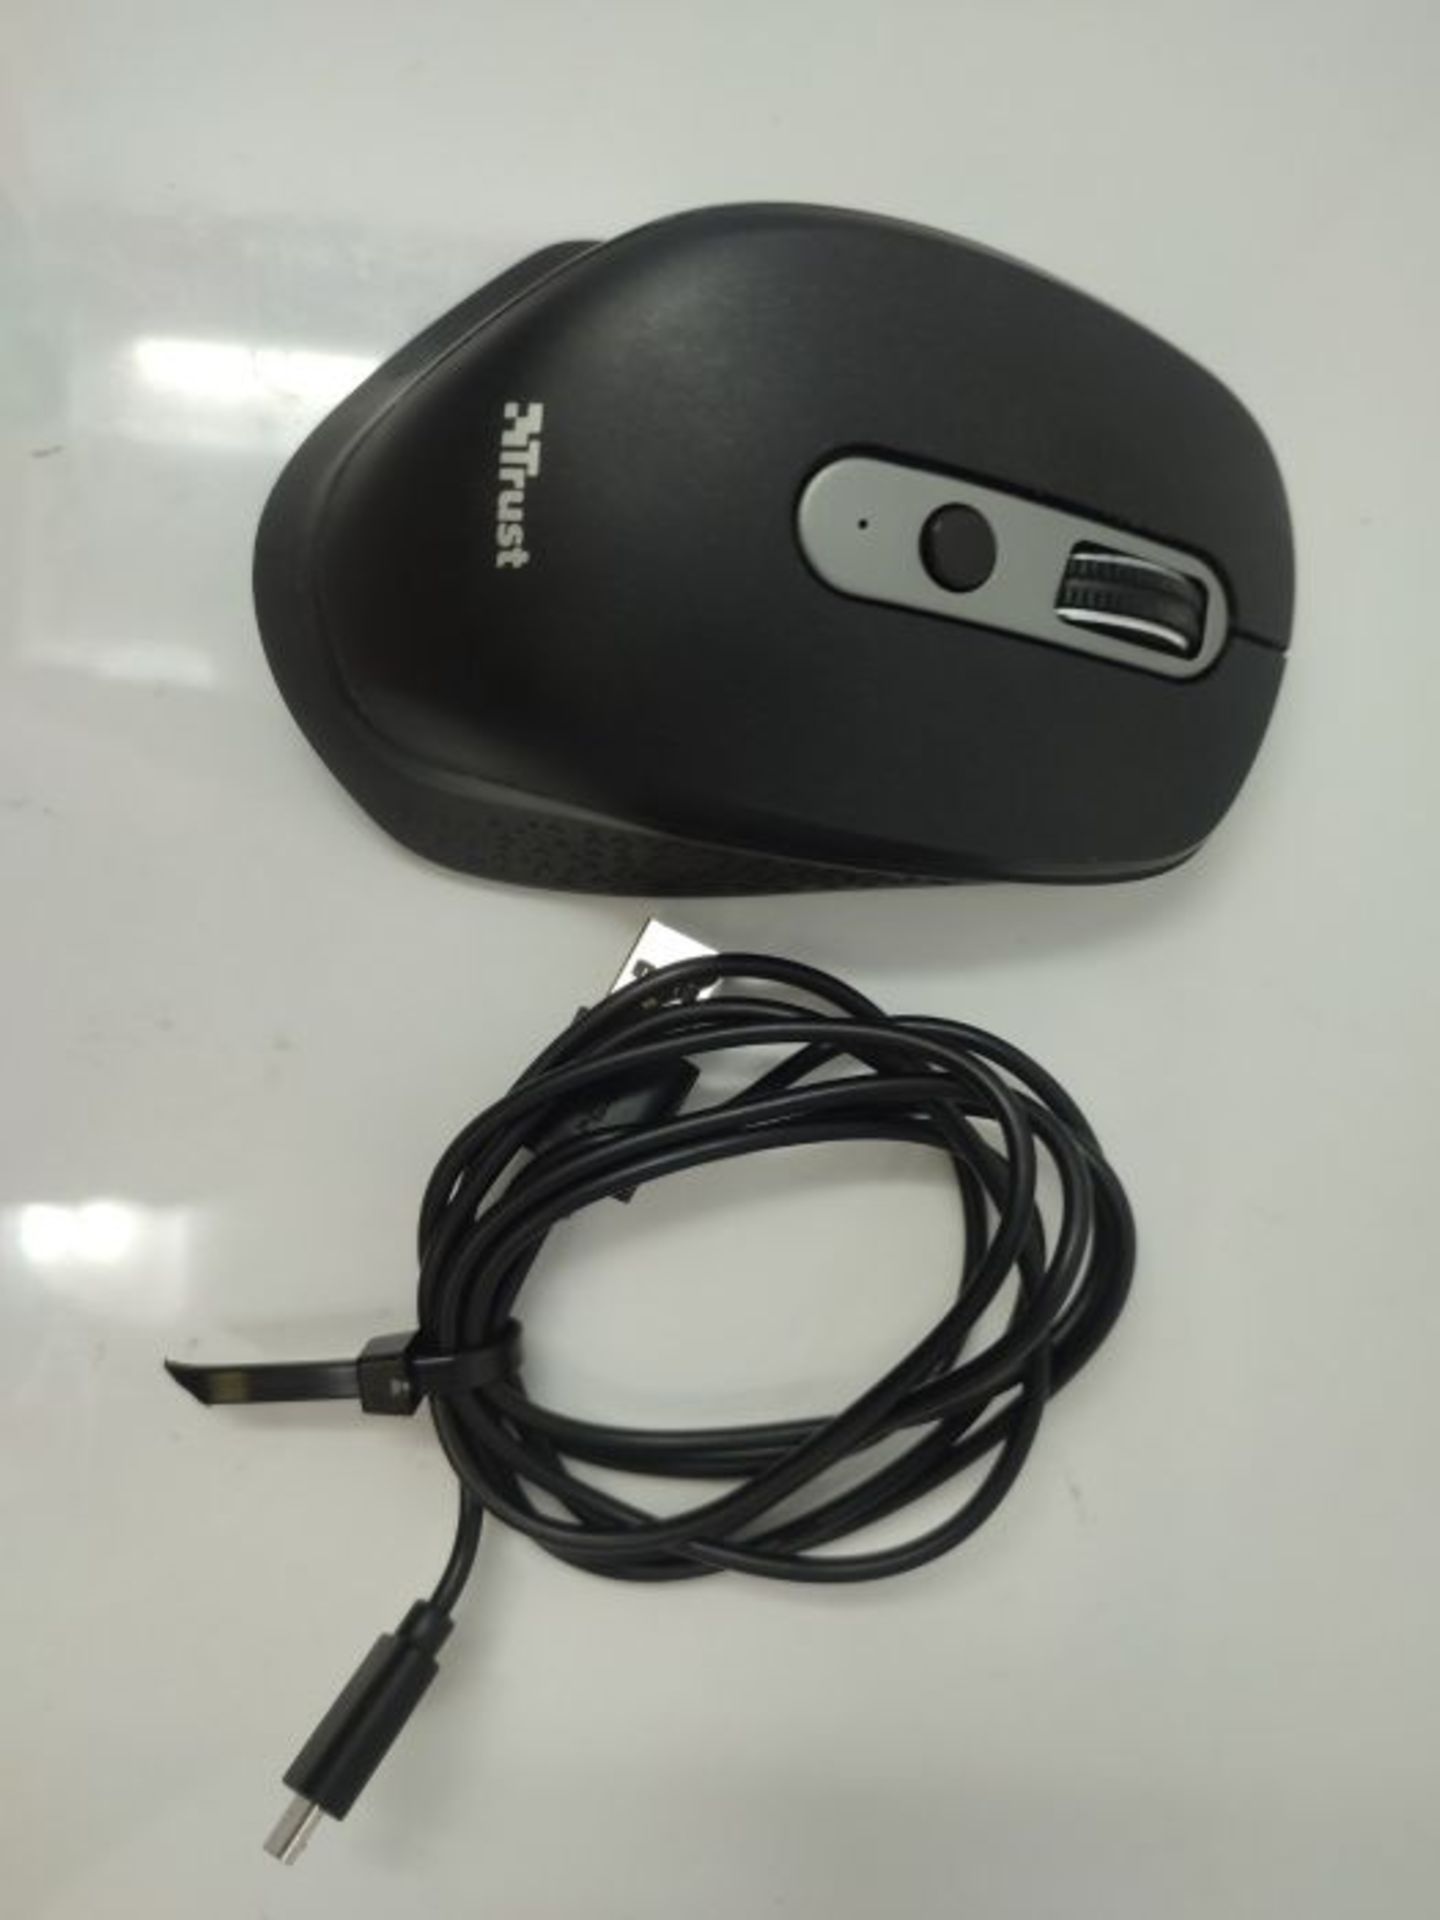 [INCOMPLETE] Trust Ozaa Rechargeable Wireless Mouse, 800-2400 DPI, 6 Buttons, Silent L - Image 2 of 3